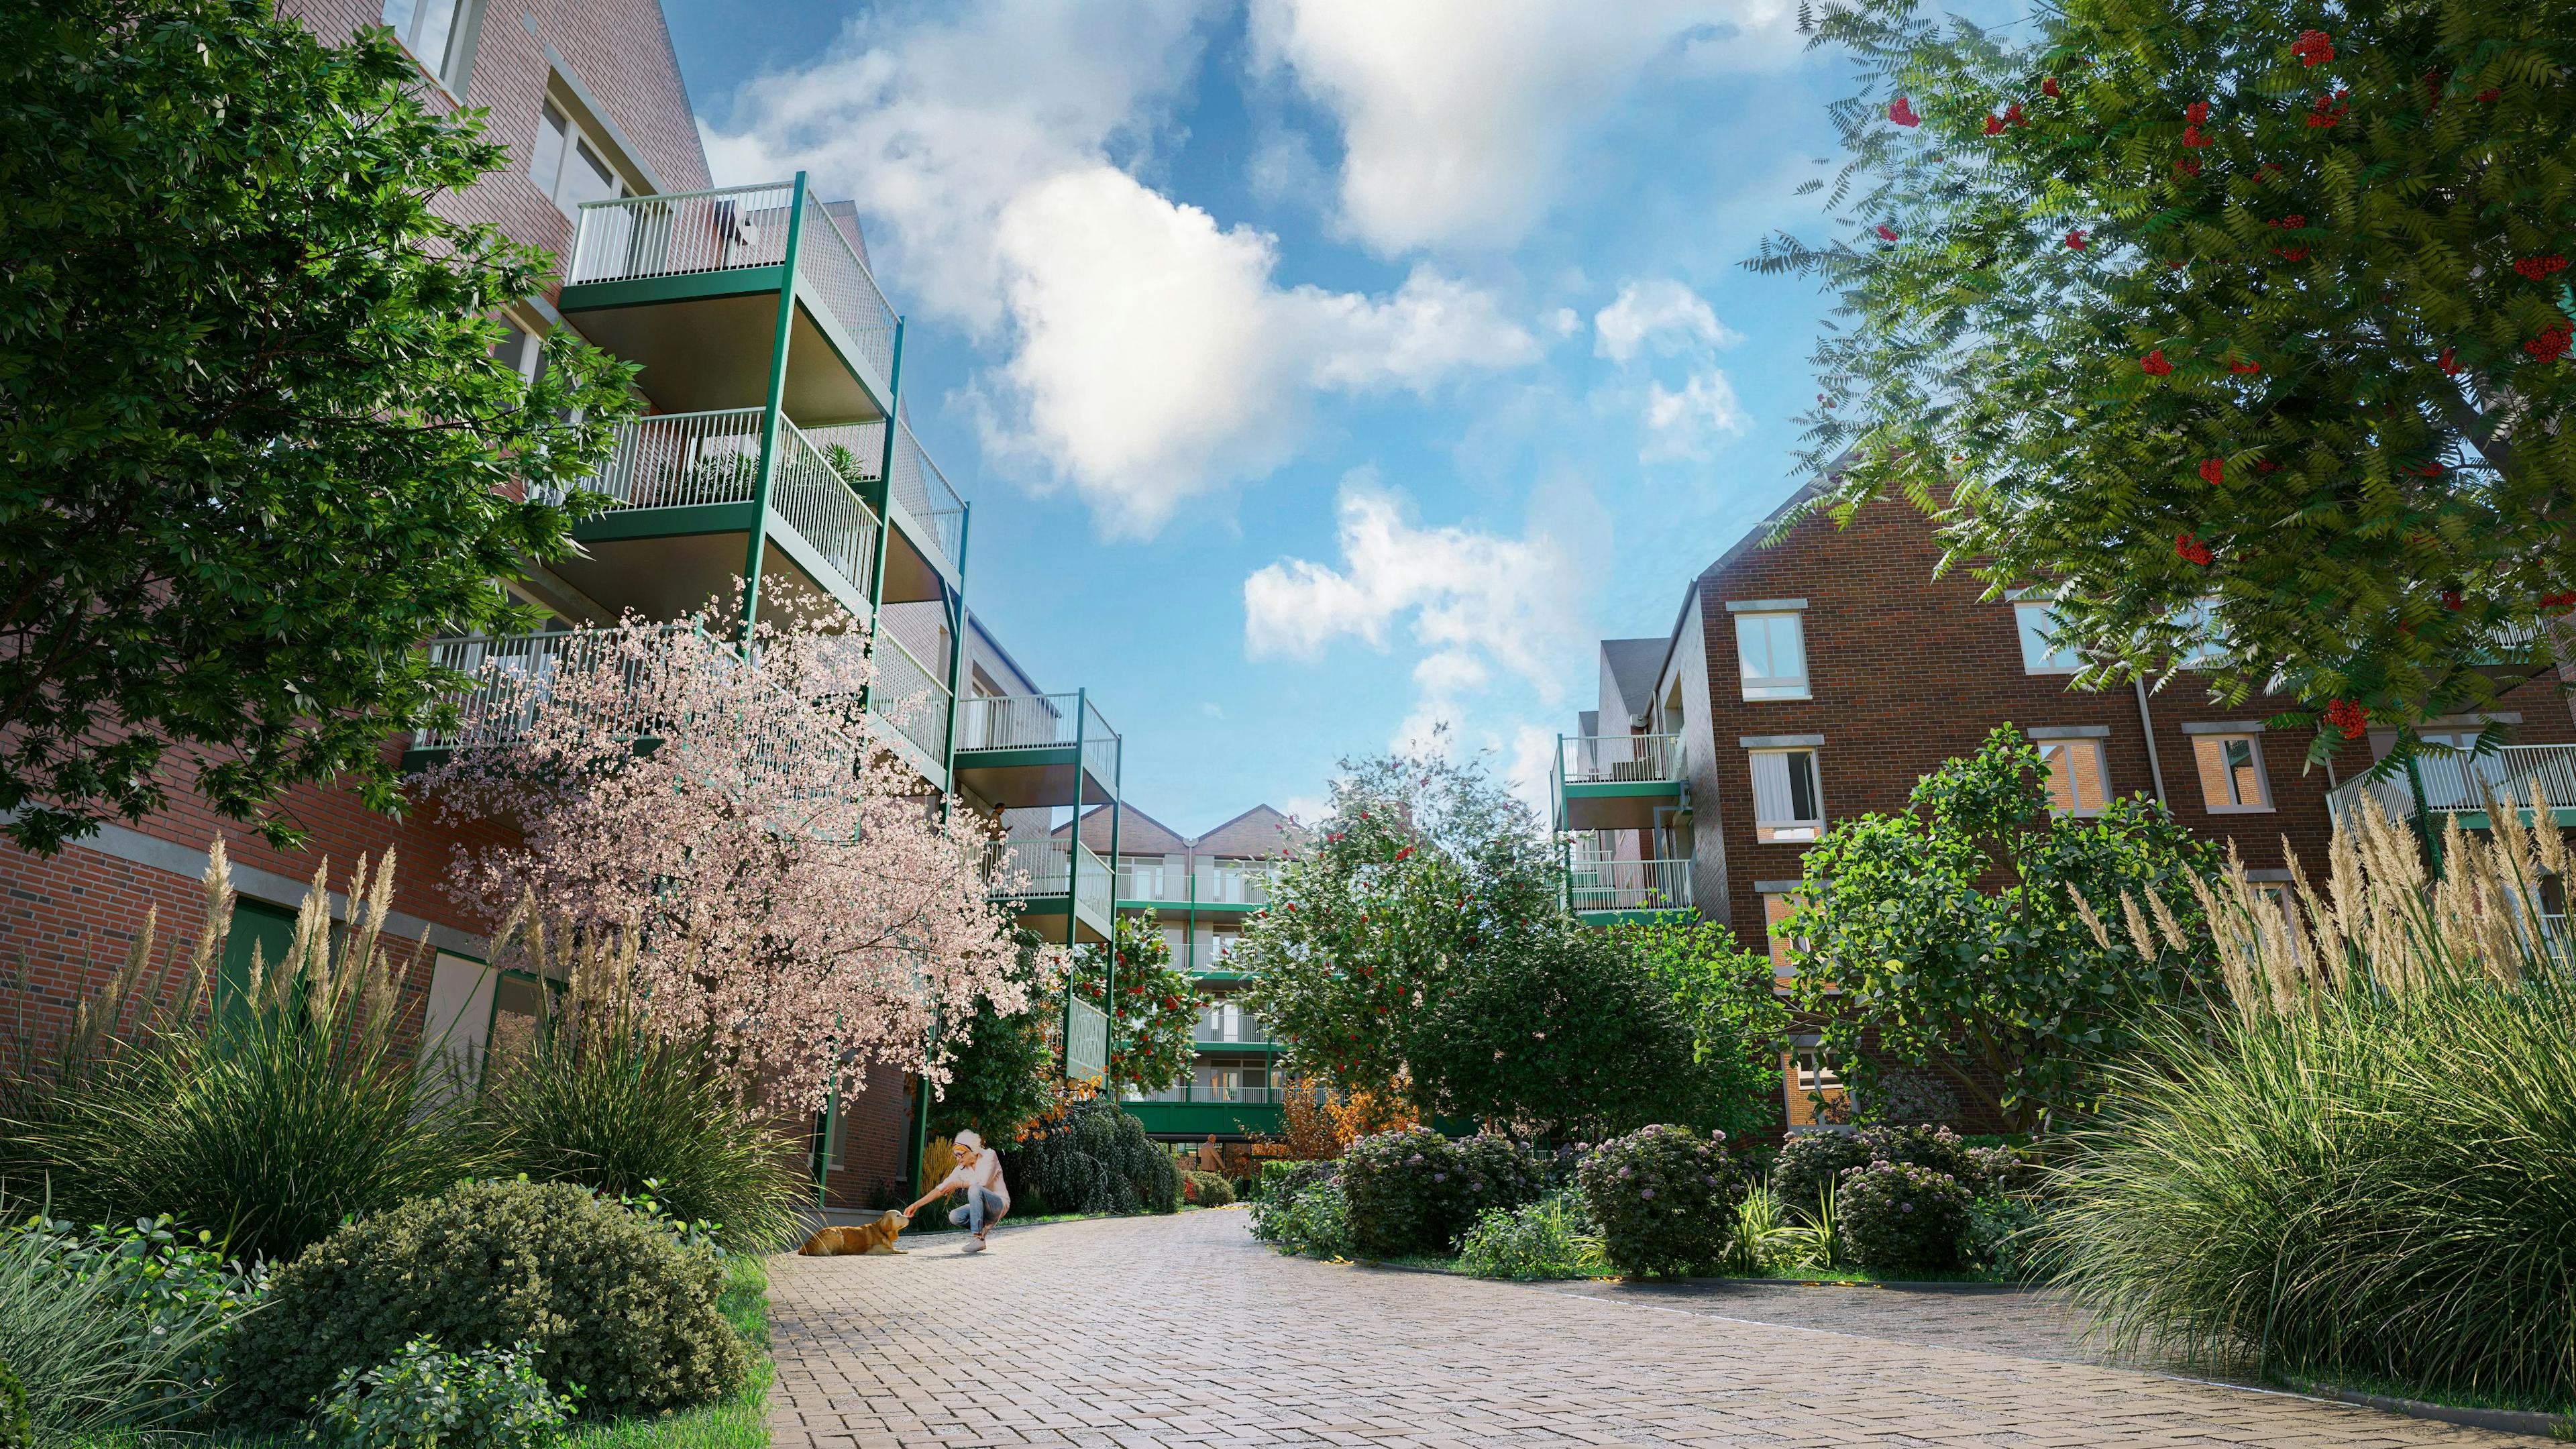 Thrive Living by Retirement Villages  - The Wyldewoods in The Wyldewoods, Whitchurch Road, CH3 5QD - 000